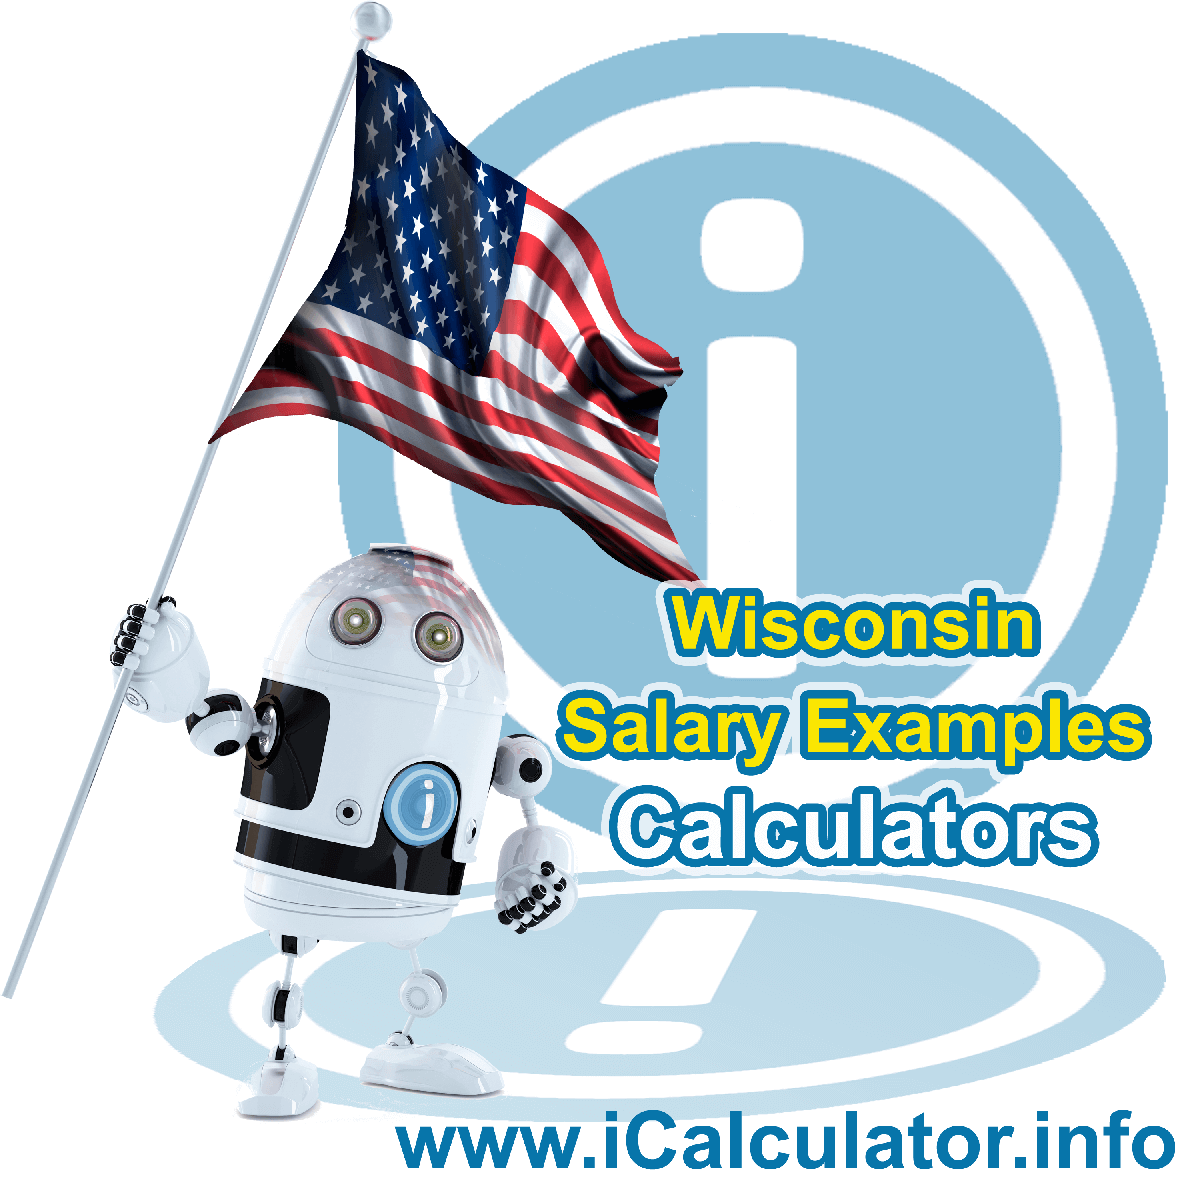 Wisconsin Salary Example for $ 290,000.00 in 2023 | iCalculator™ | $ 290,000.00 salary example for employee and employer paying Wisconsin State tincome taxes. Detailed salary after tax calculation including Wisconsin State Tax, Federal State Tax, Medicare Deductions, Social Security, Capital Gains and other income tax and salary deductions complete with supporting Wisconsin state tax tables 